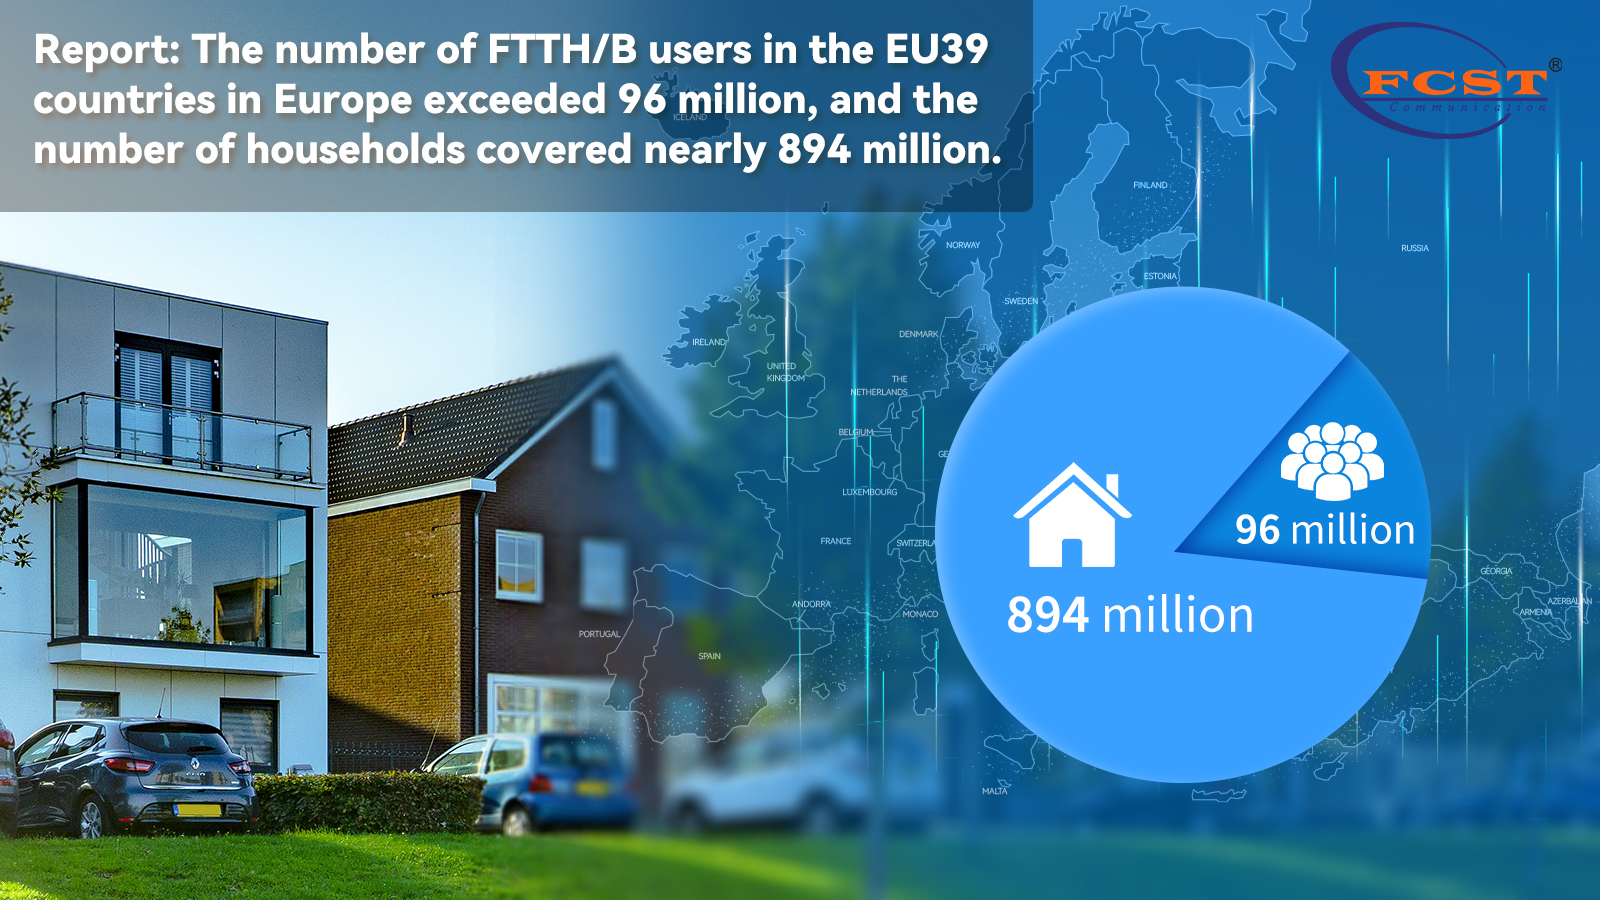 Report: The number of FTTH/B users in the EU39 countries in Europe exceeded 96 million, and the number of households covered nearly 894 million.